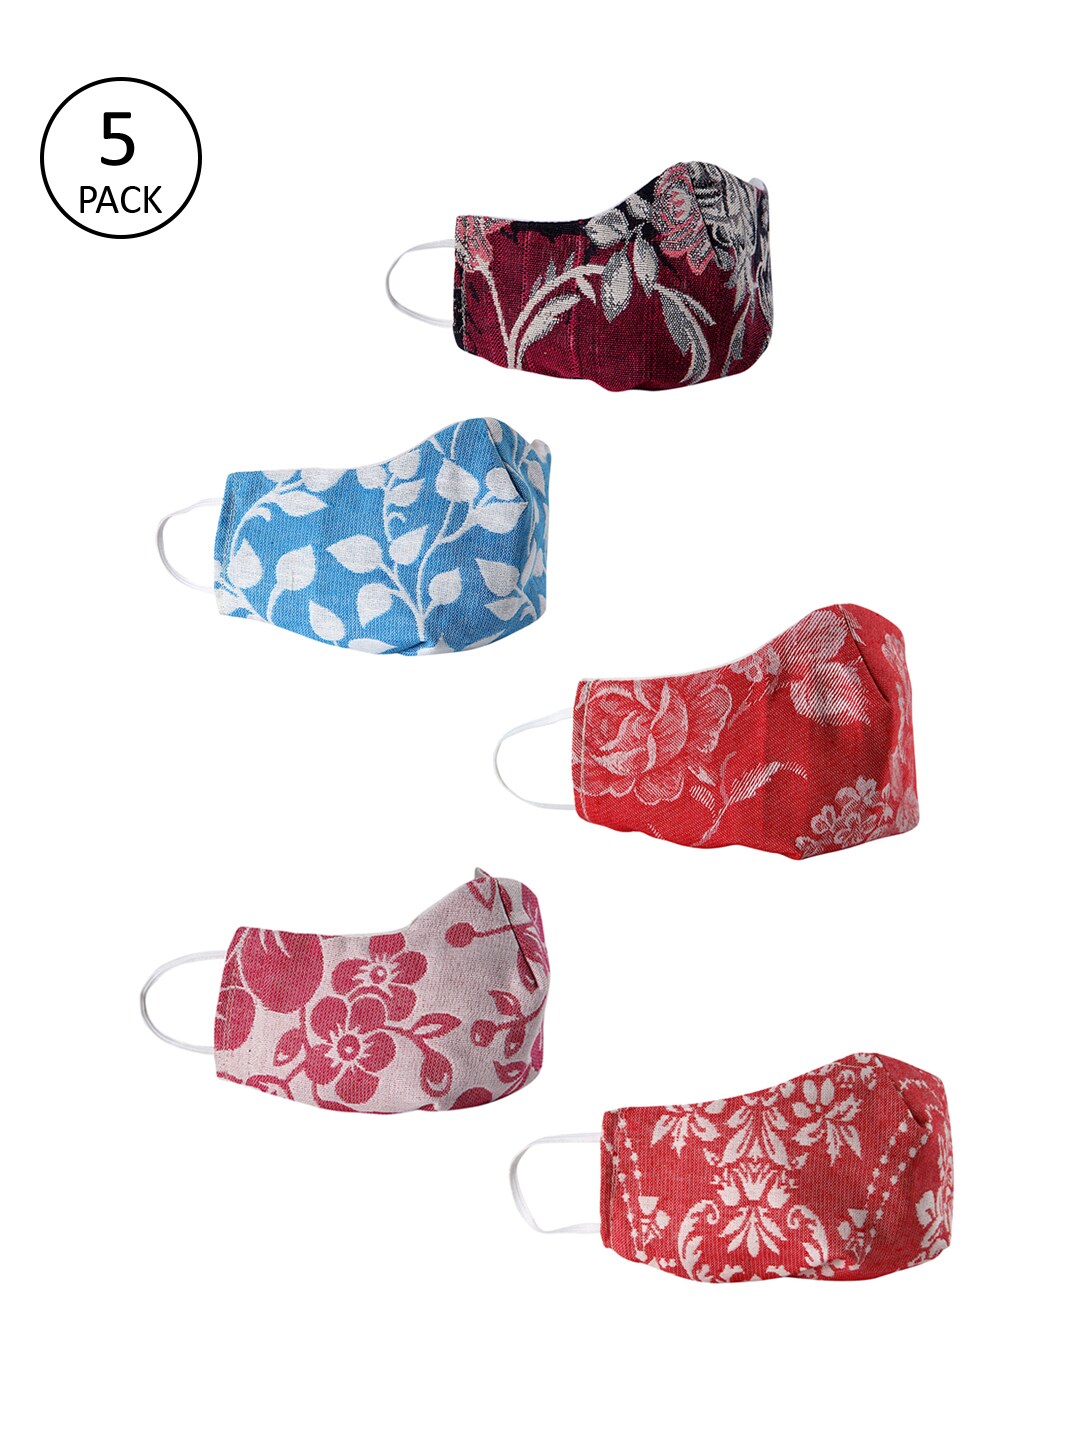 ROMEE Unisex 5 Pcs 3-Ply Reusable Printed Outdoor Masks Price in India